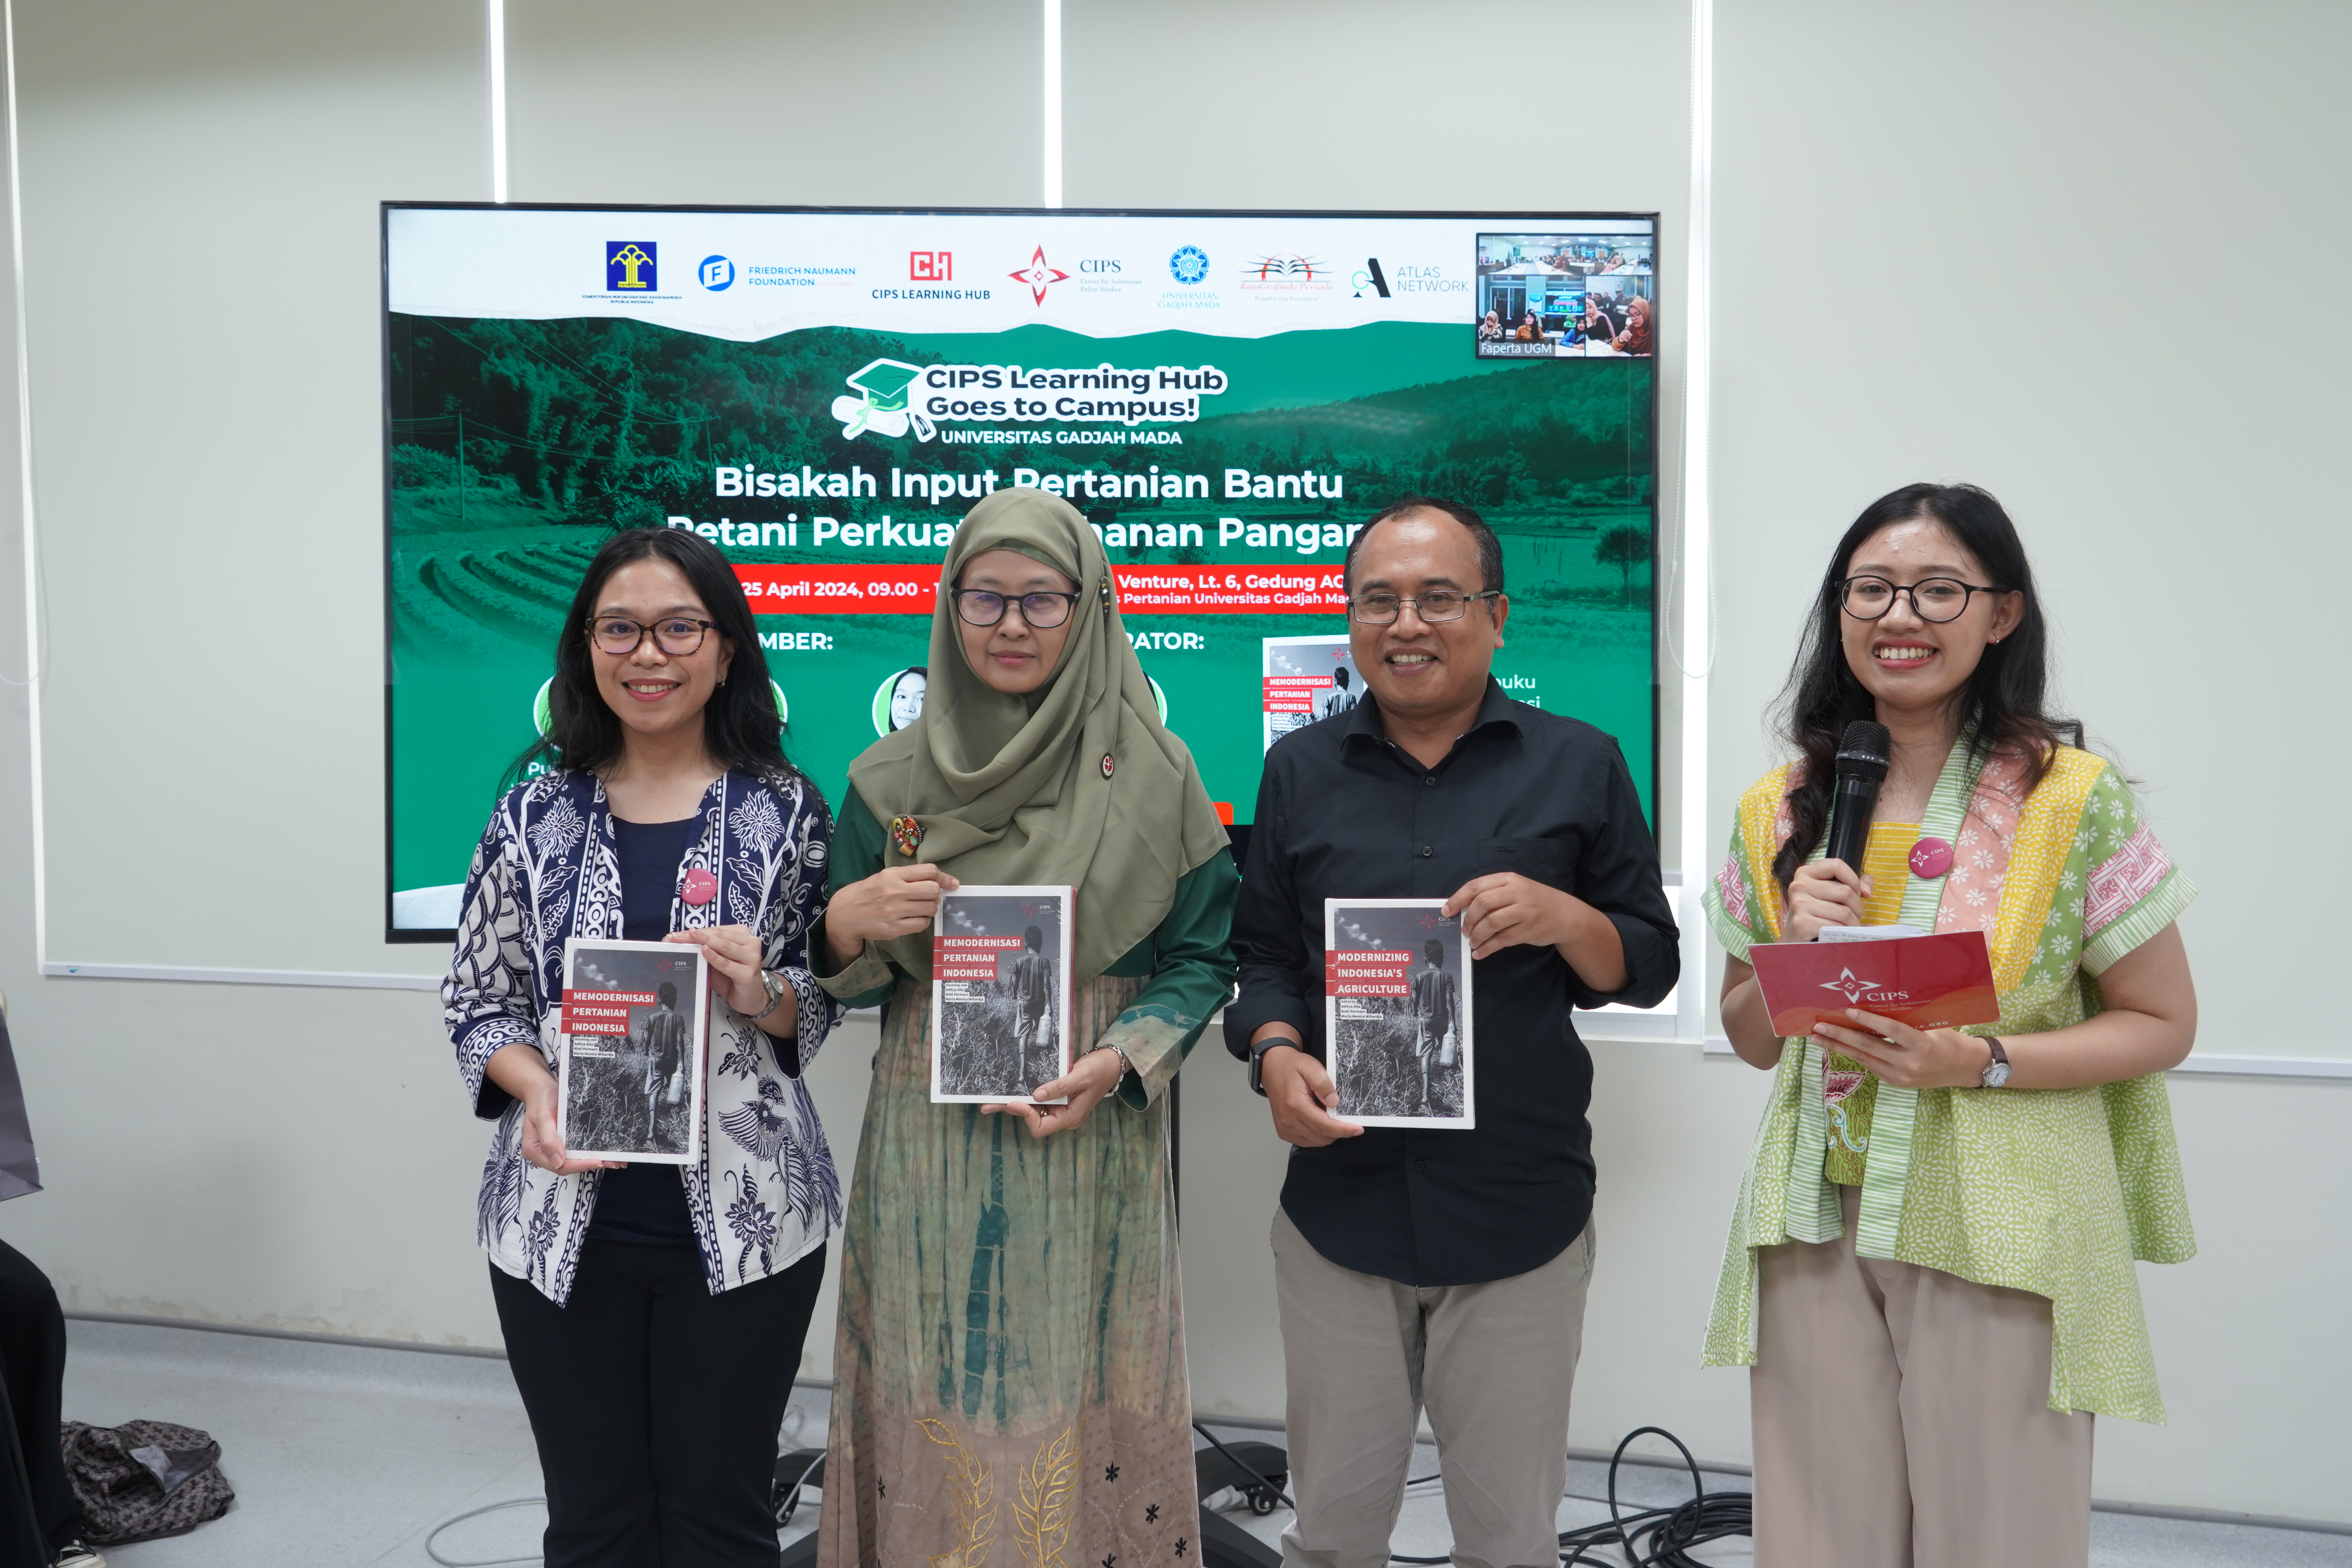 The three speakers are standing next to the Emcee, each of them holding a book published by CIPS titled, "Modernizing Indonesia's Agriculture".